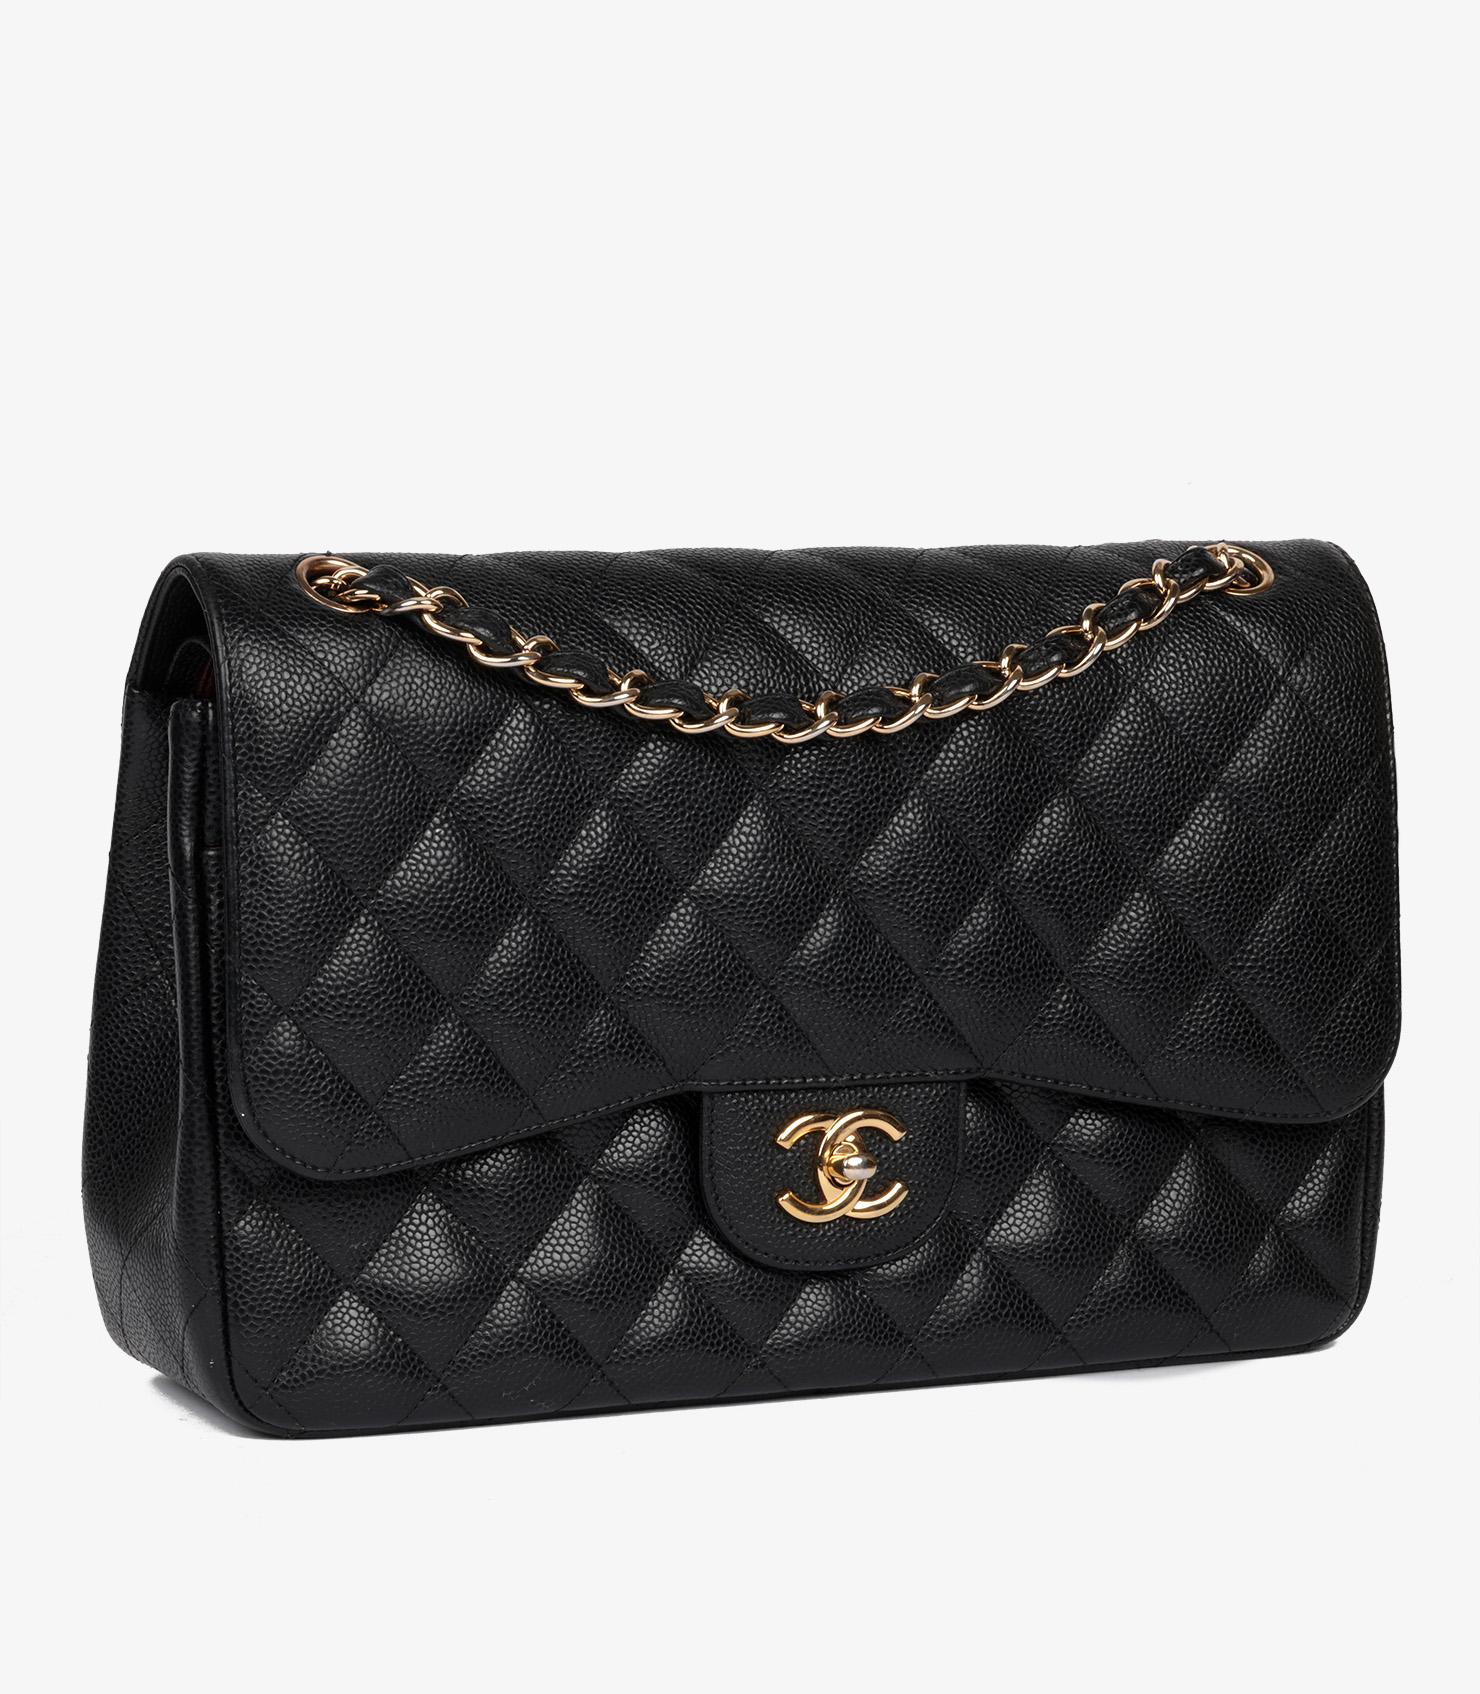 Chanel Black Quilted Caviar Leather Jumbo Classic Double Flap Bag In Excellent Condition For Sale In Bishop's Stortford, Hertfordshire